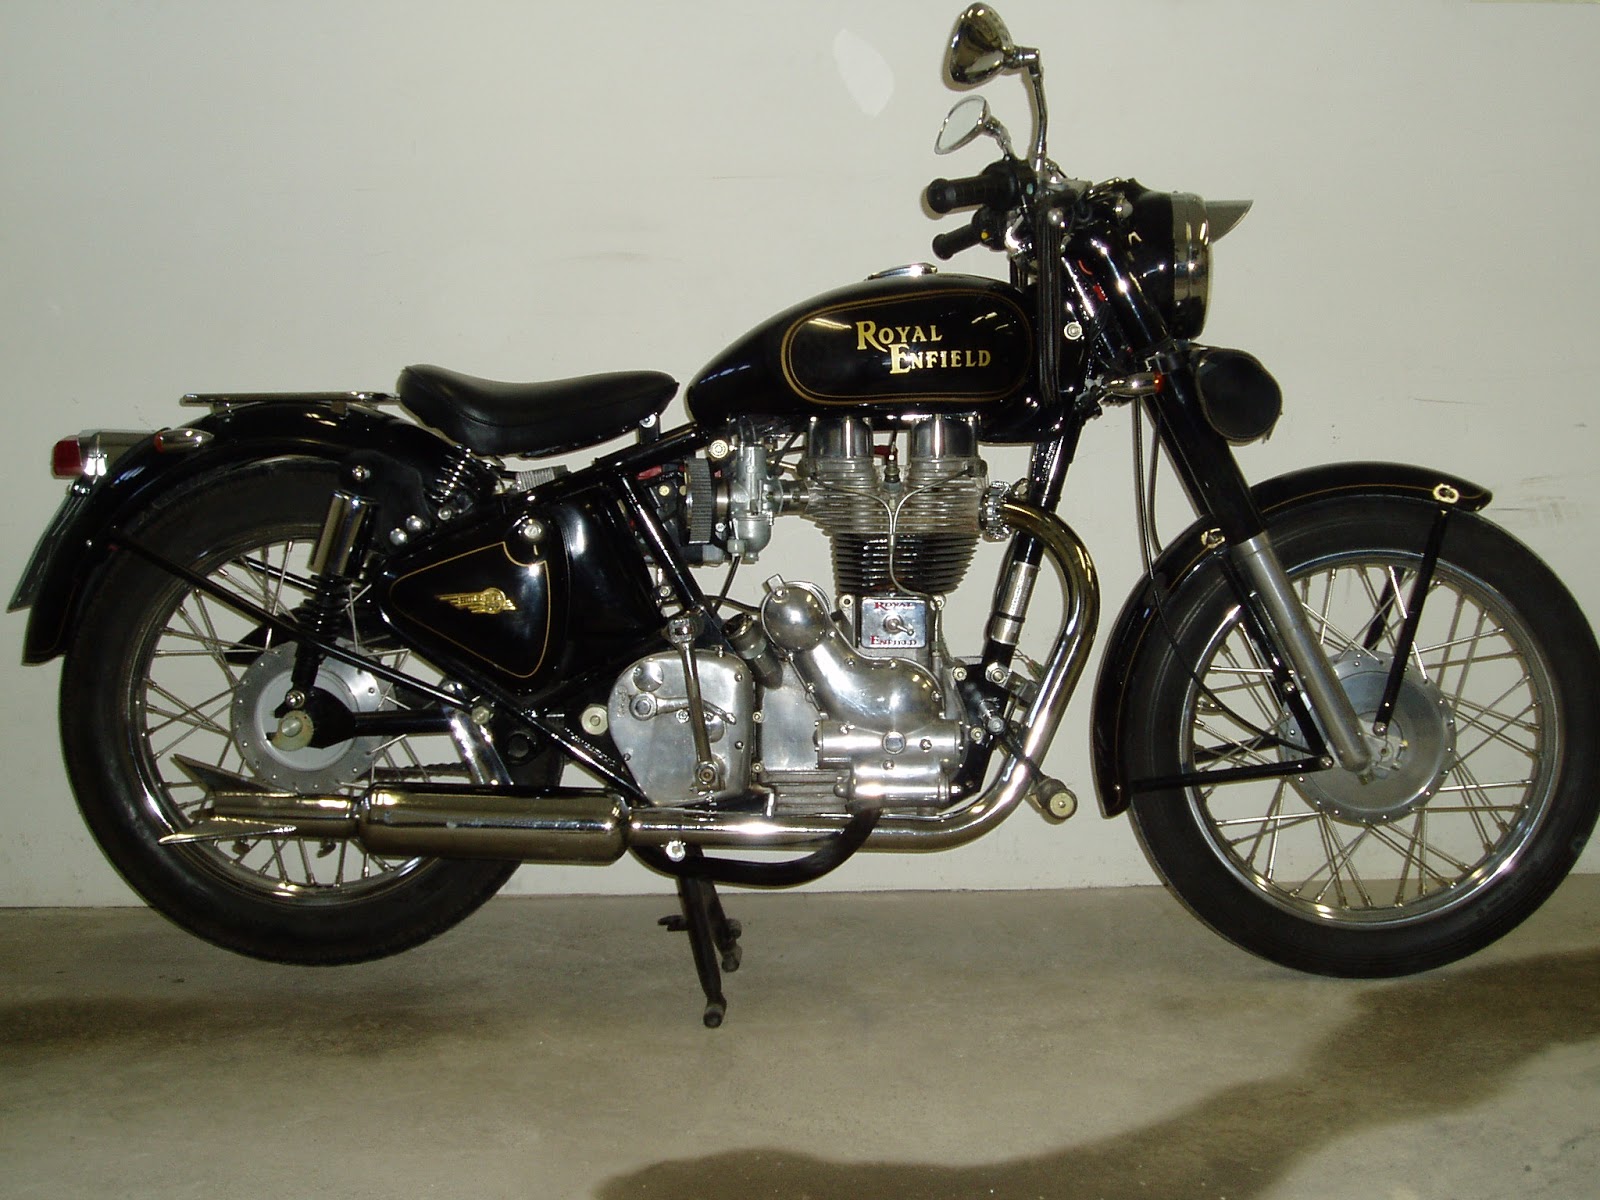 Royal Enfield Bullet Motorcycle Pictures Wallpaper Share